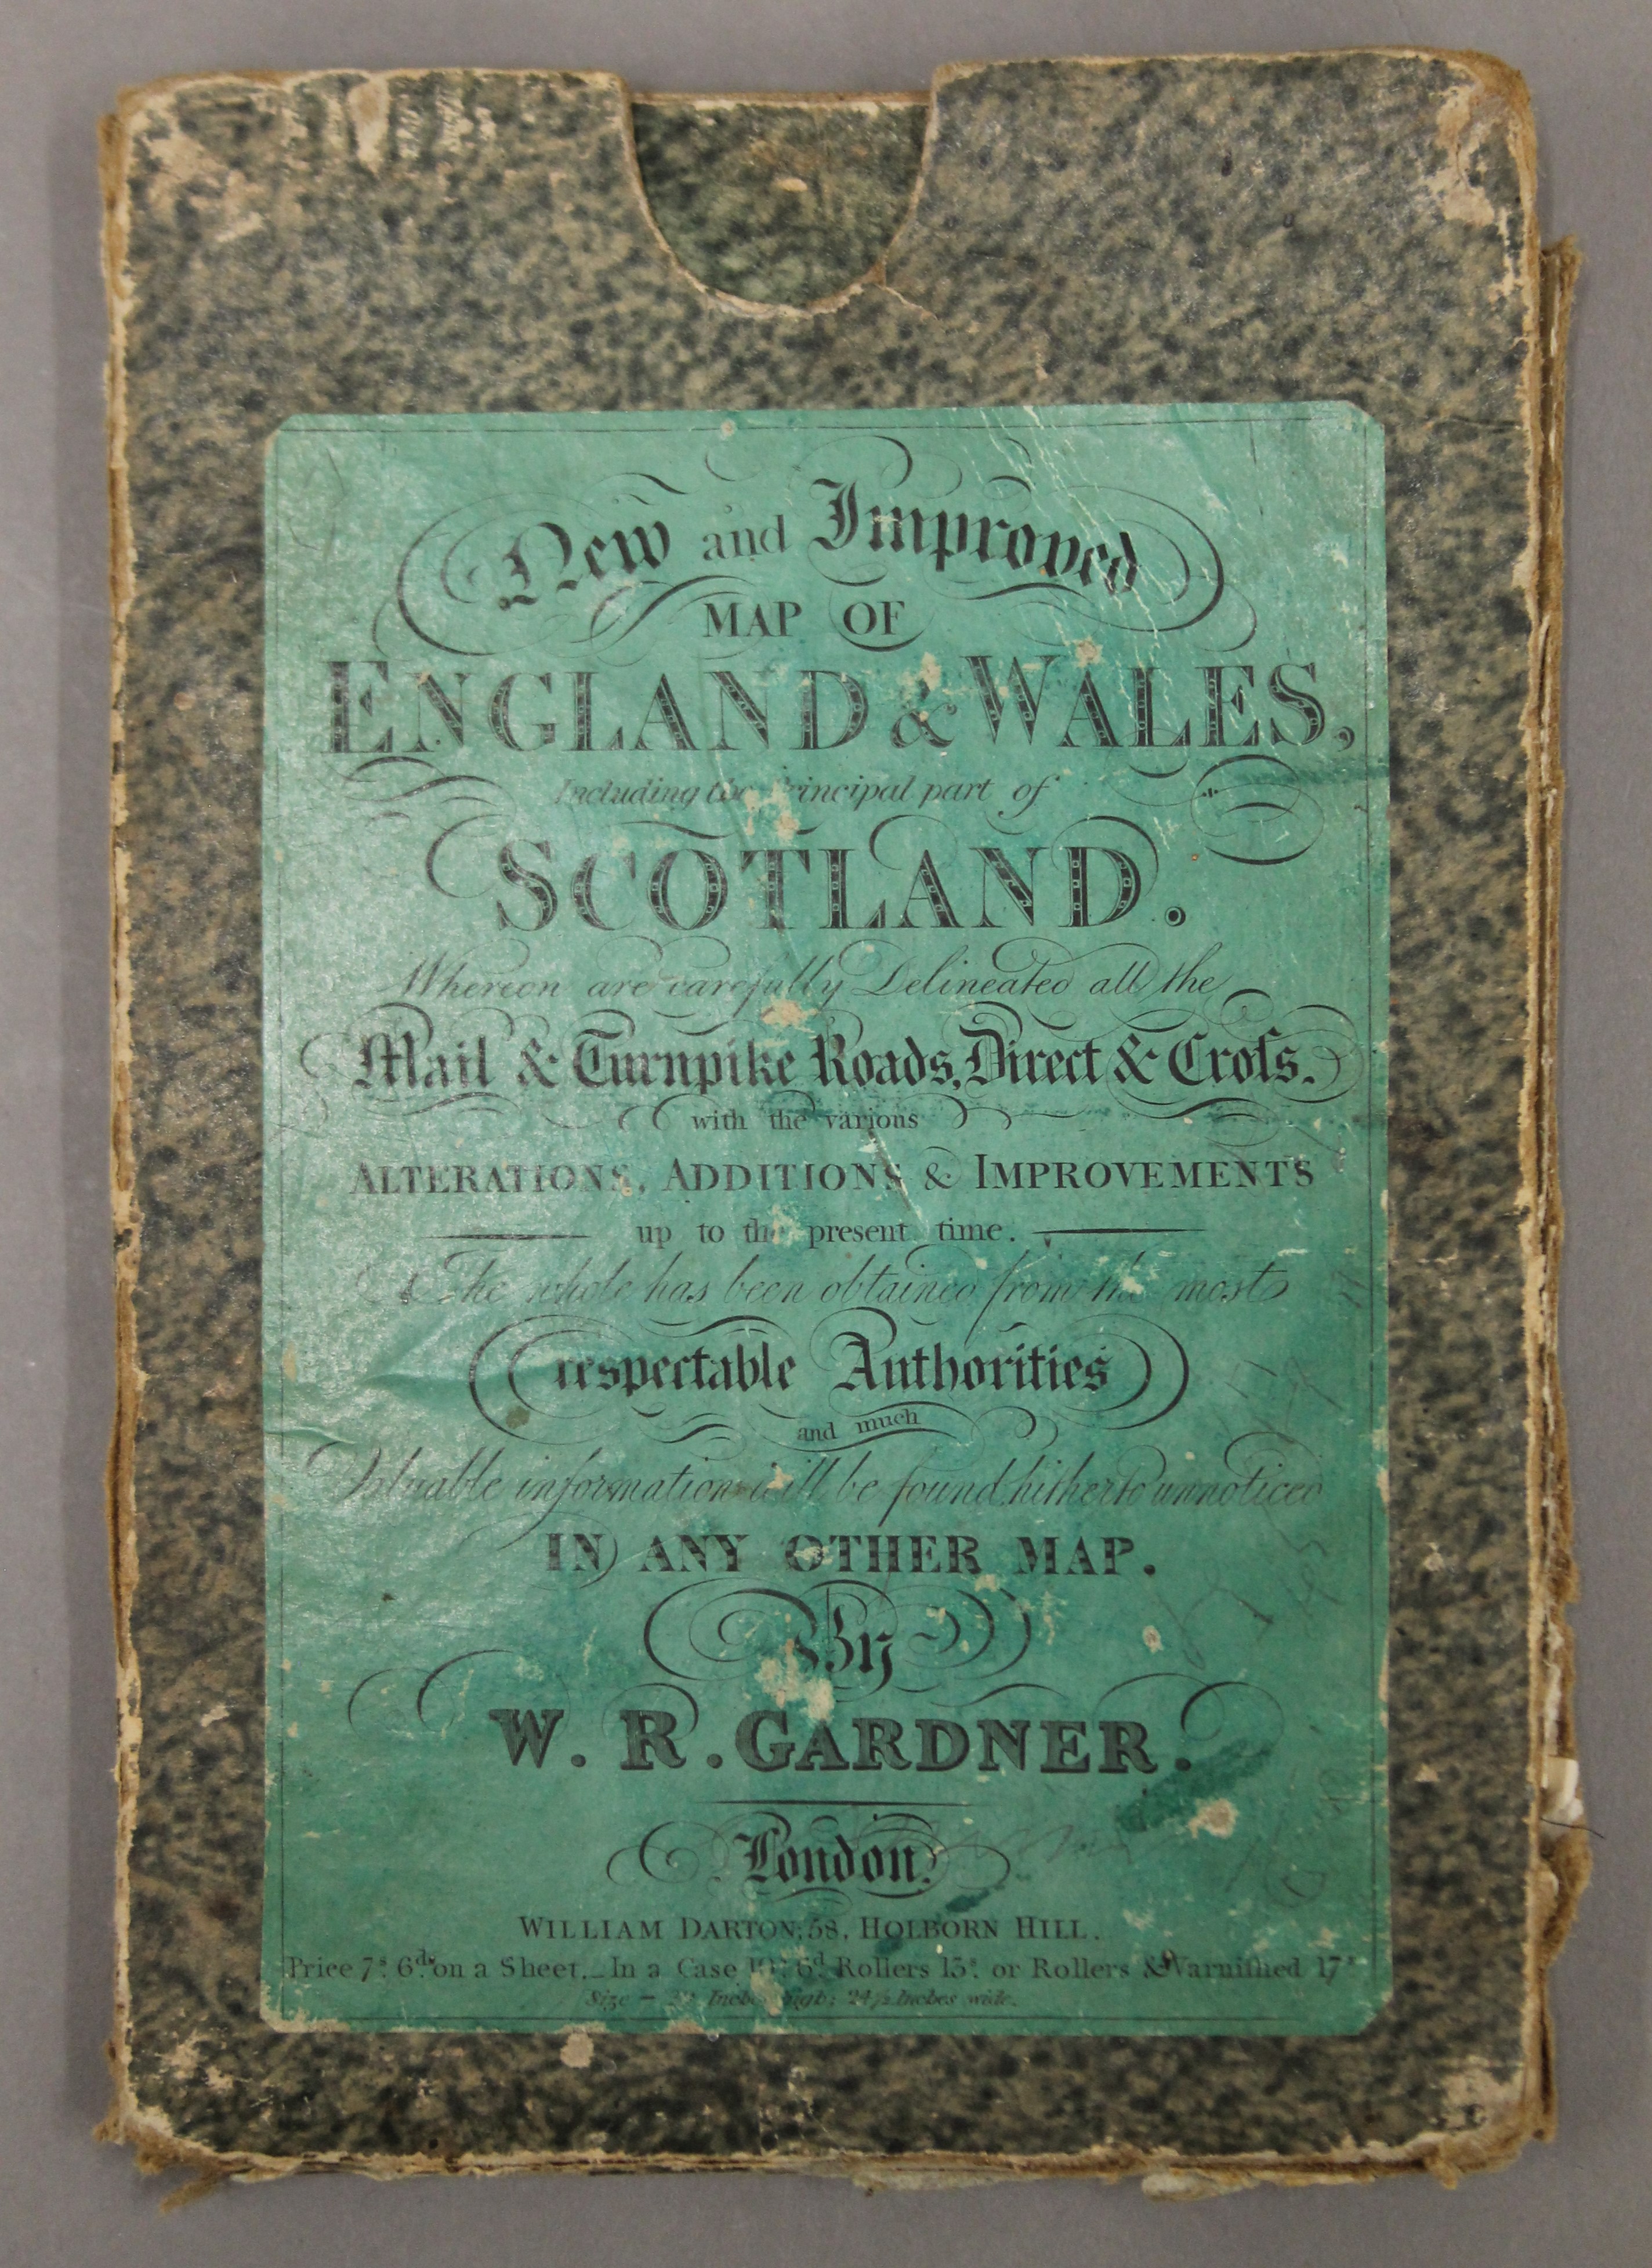 A folding coloured map of England and Wales including part of Scotland by W R Gardner, - Image 2 of 4